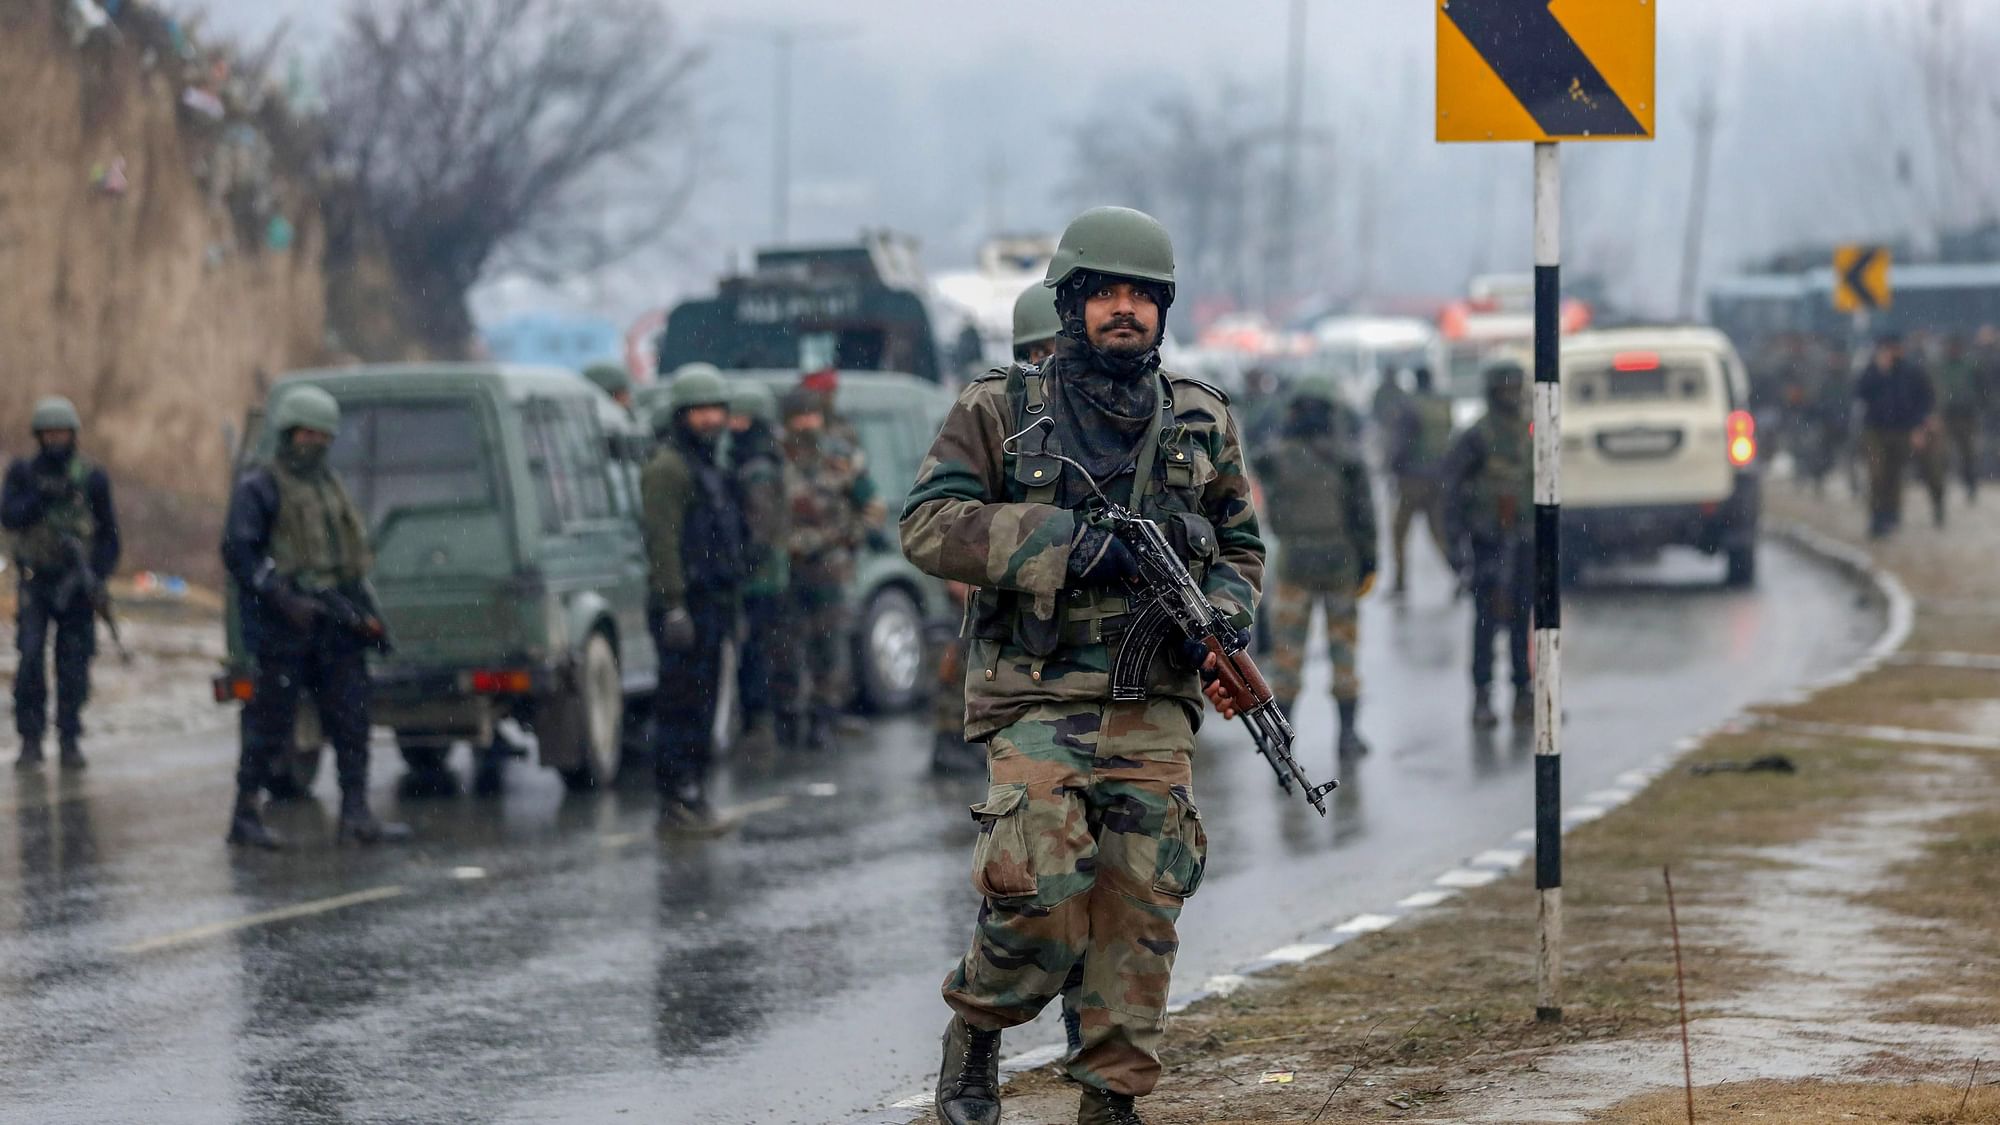 At least 39 CRPF personnel were killed in an IED blast in Jammu and Kashmir’s Pulwama.